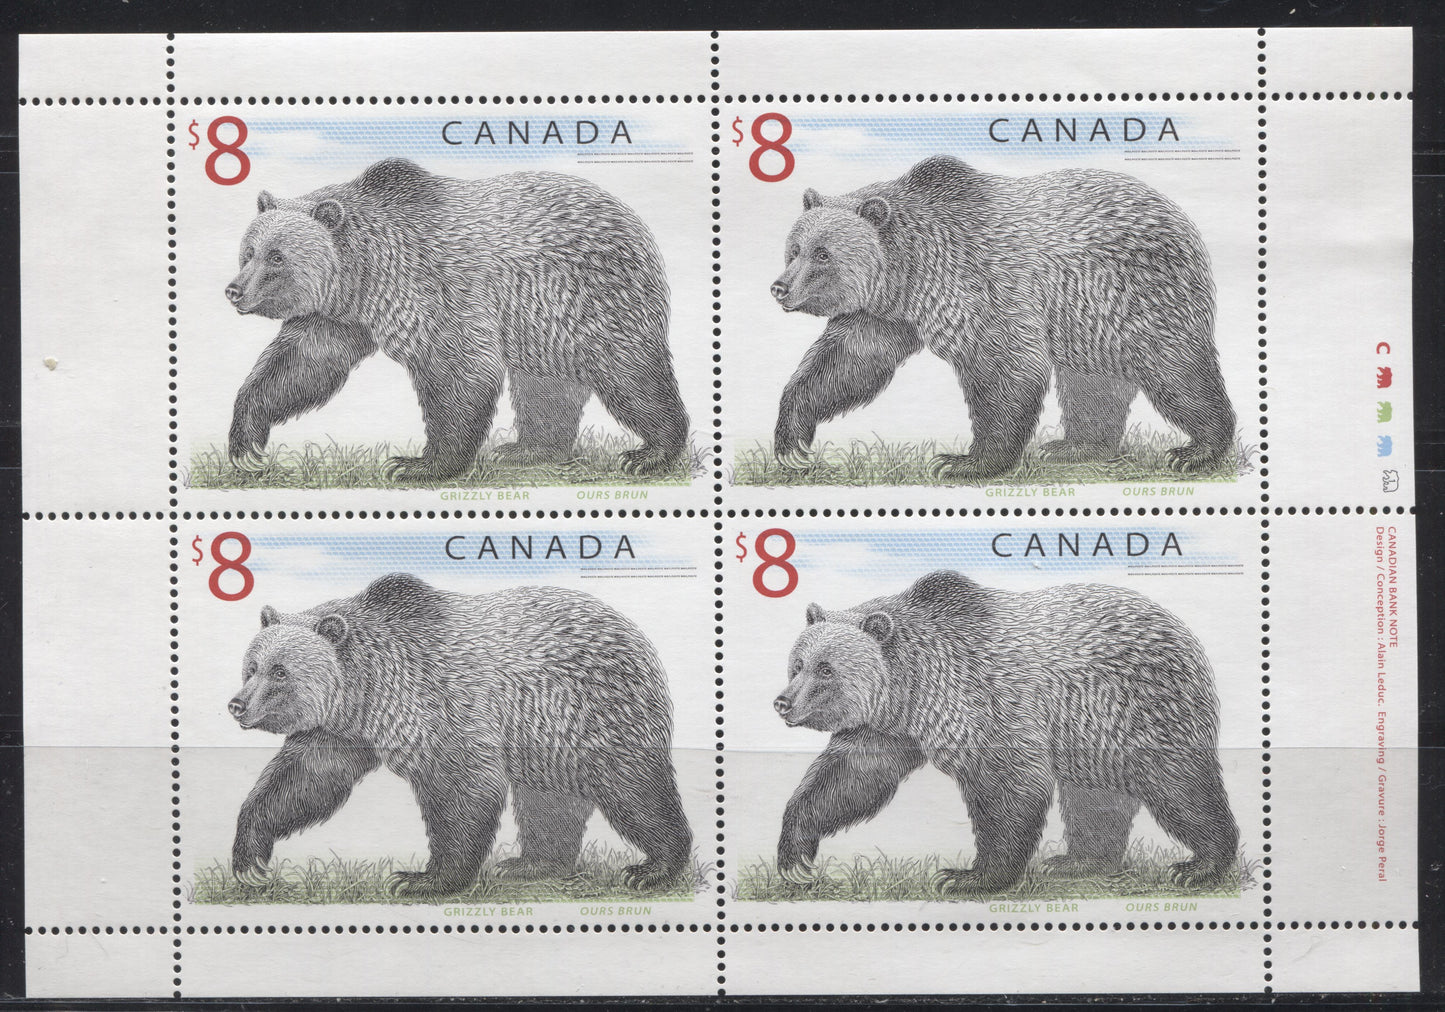 Canada #1694 $8 Multicoloured Grizzly Bear, 1998-2005 Trades and Wildlife Definitive Issue, a VFNH Sheetlet of 4 on Dead/NF Paper